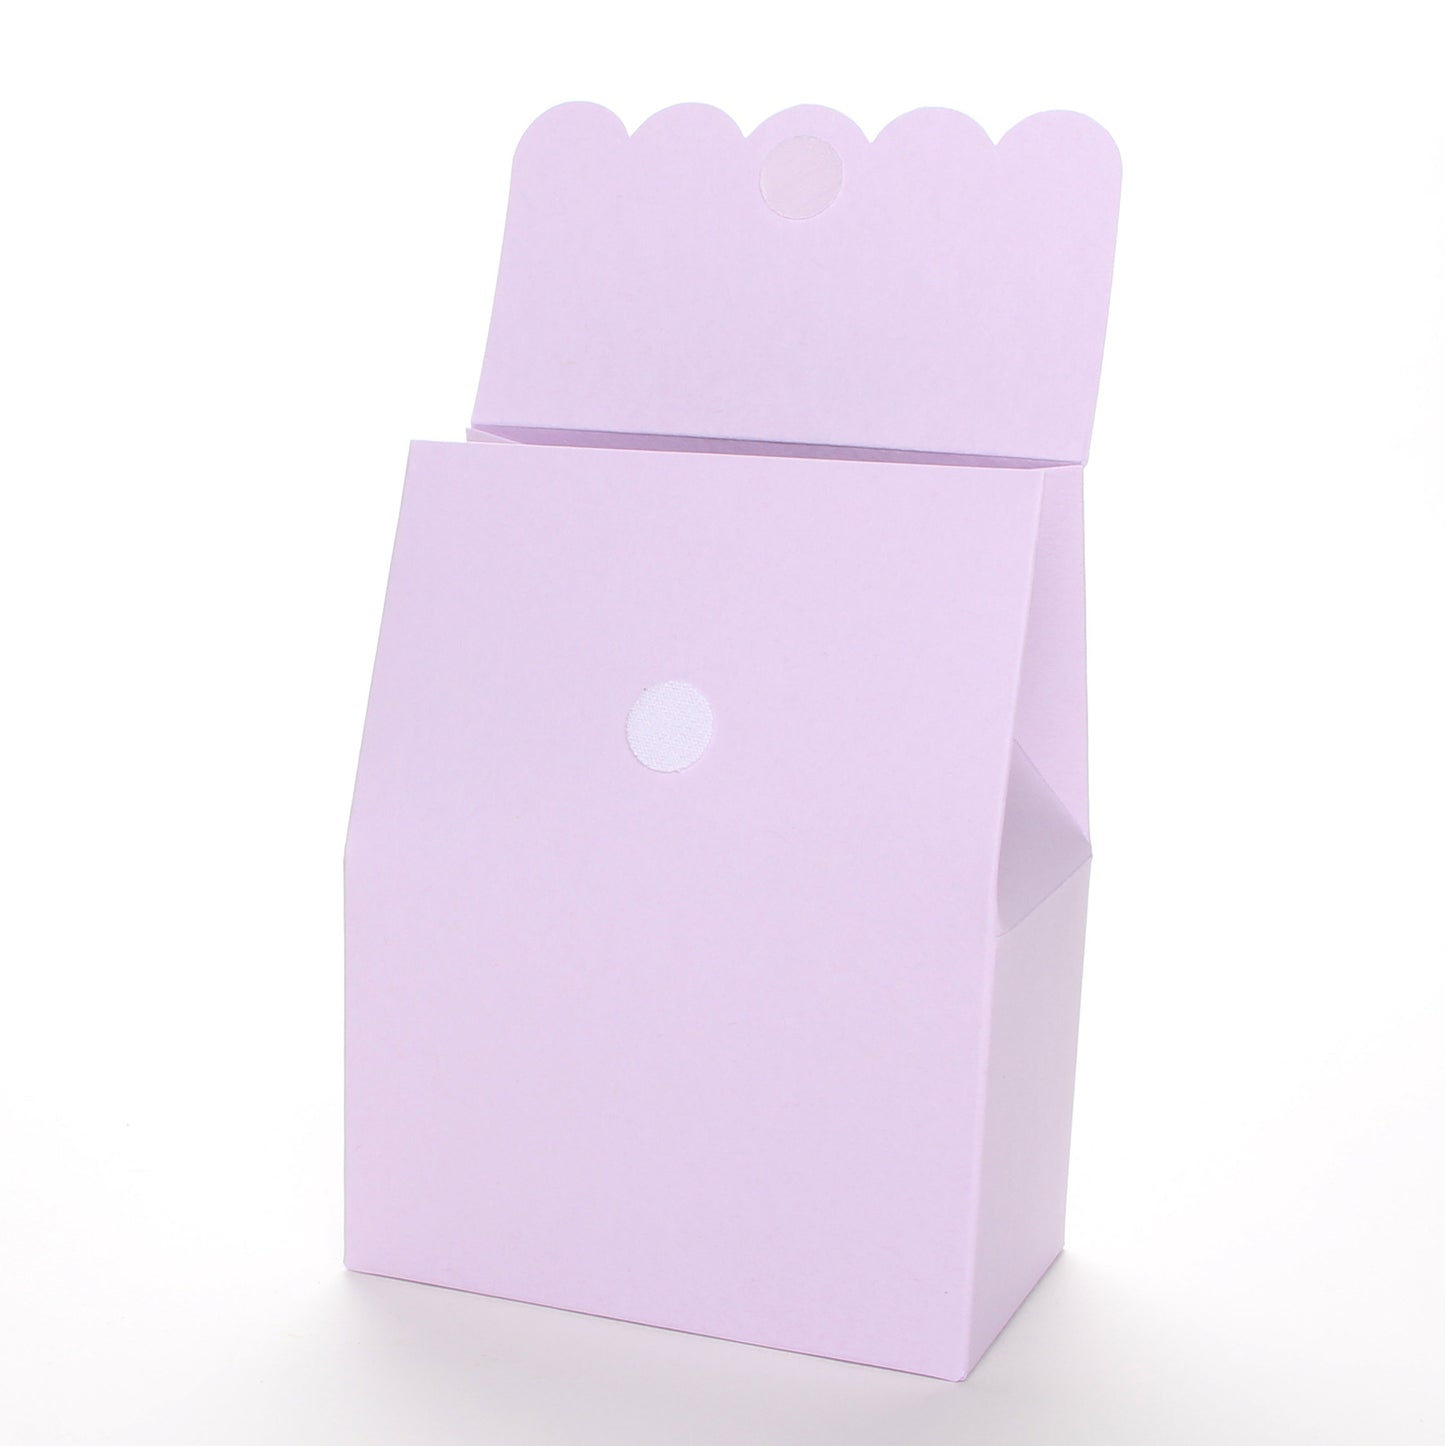 Lux Party’s lavender favor box with scalloped lid open, showing a velcro closure.